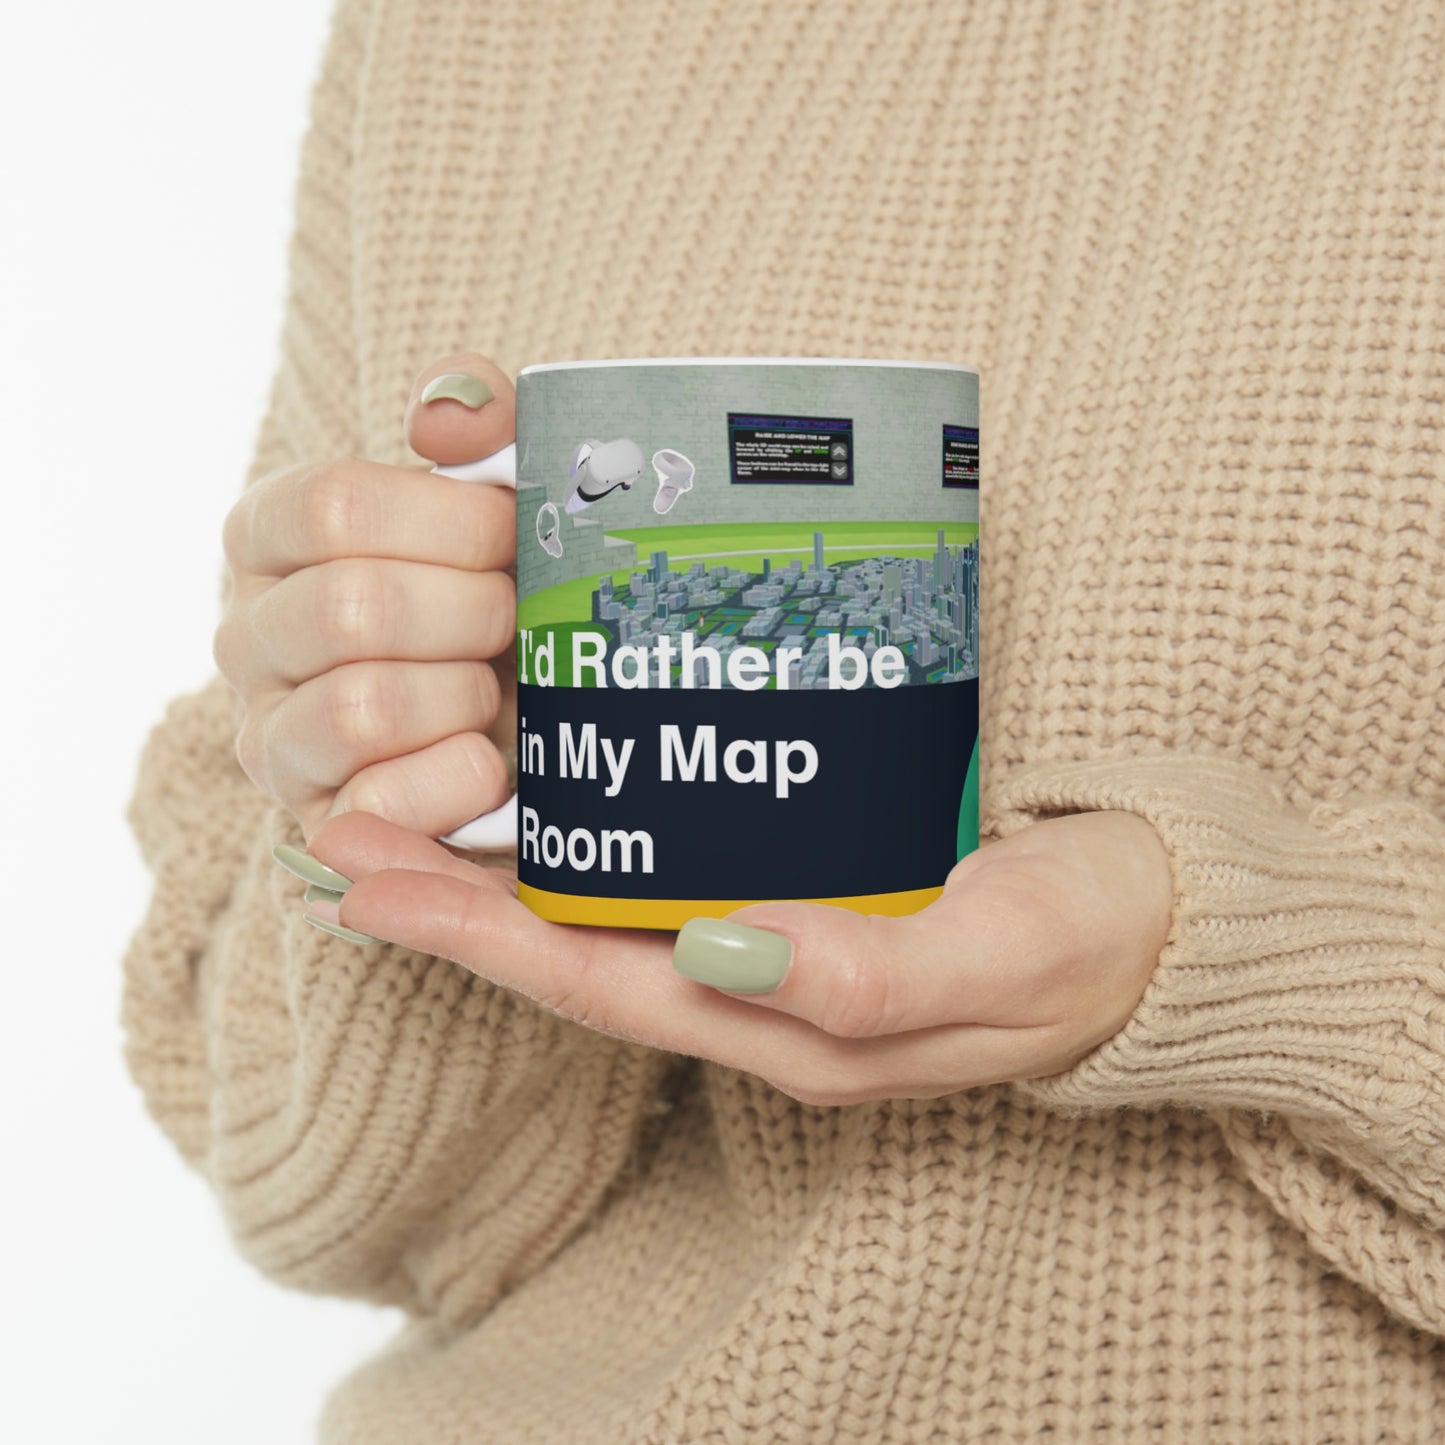 I'd Rather be in My Map Room Mug